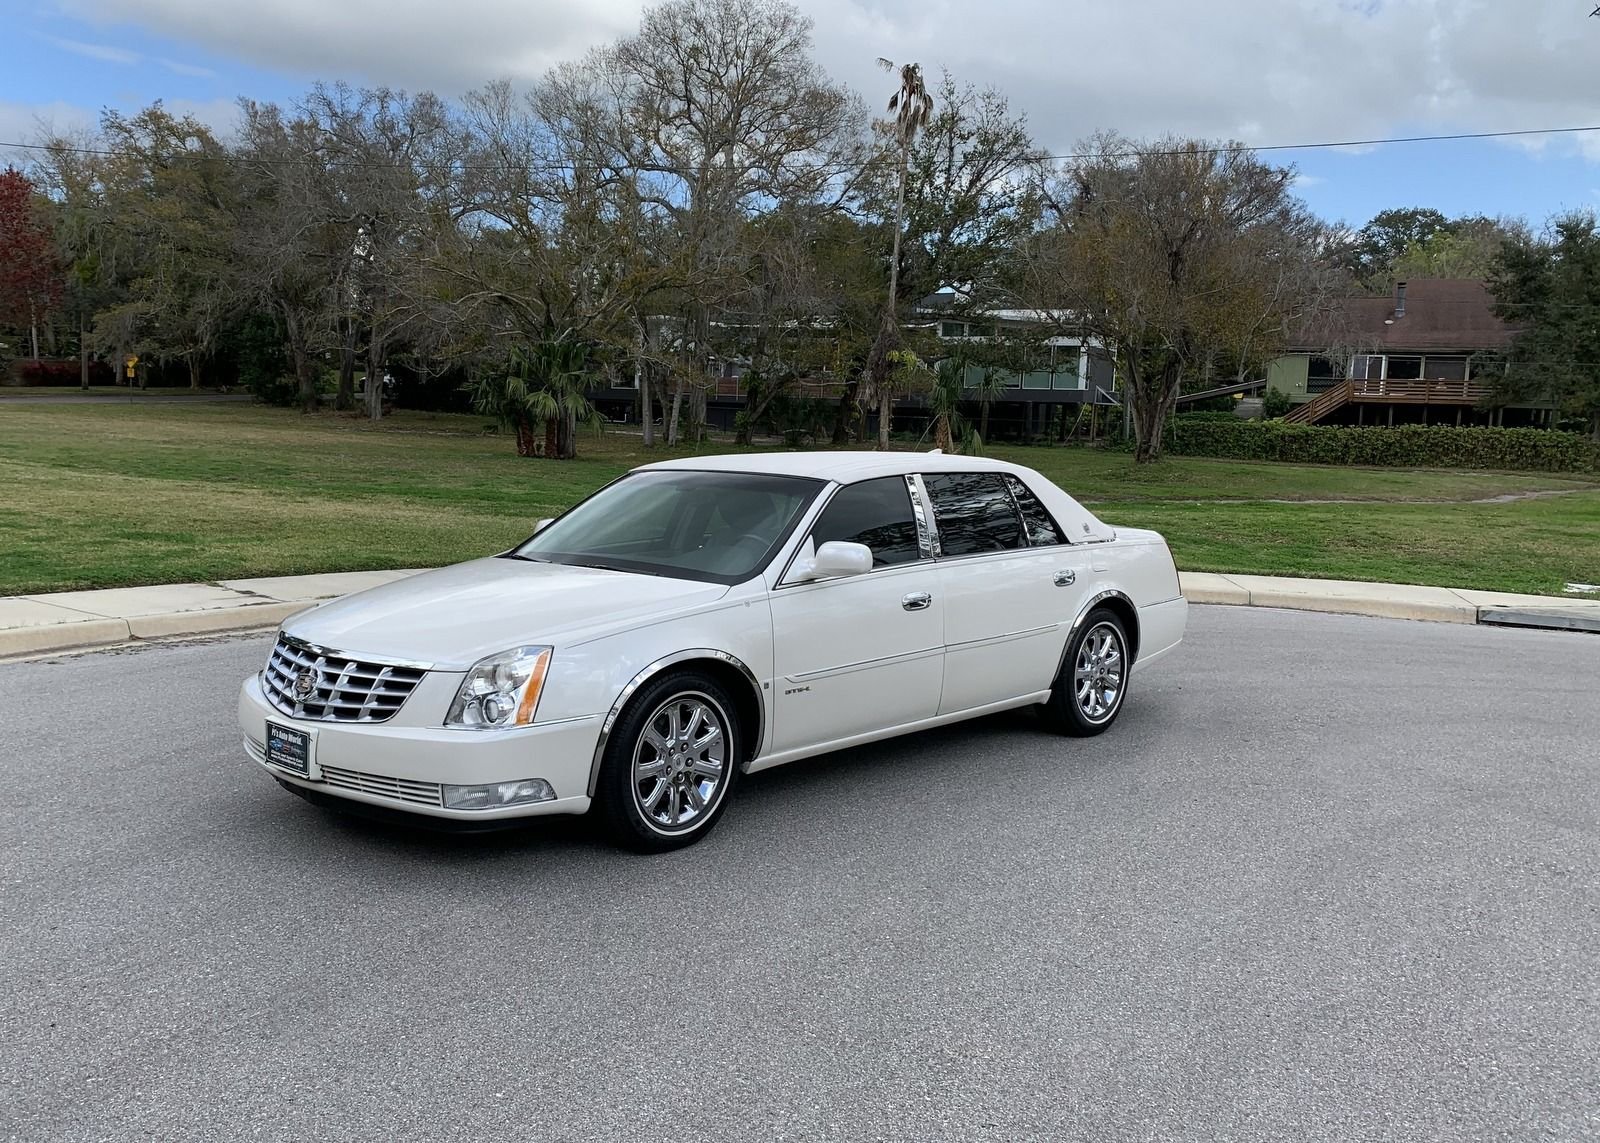 2009 Cadillac DTS-L | PJ's Auto World Classic Cars for Sale